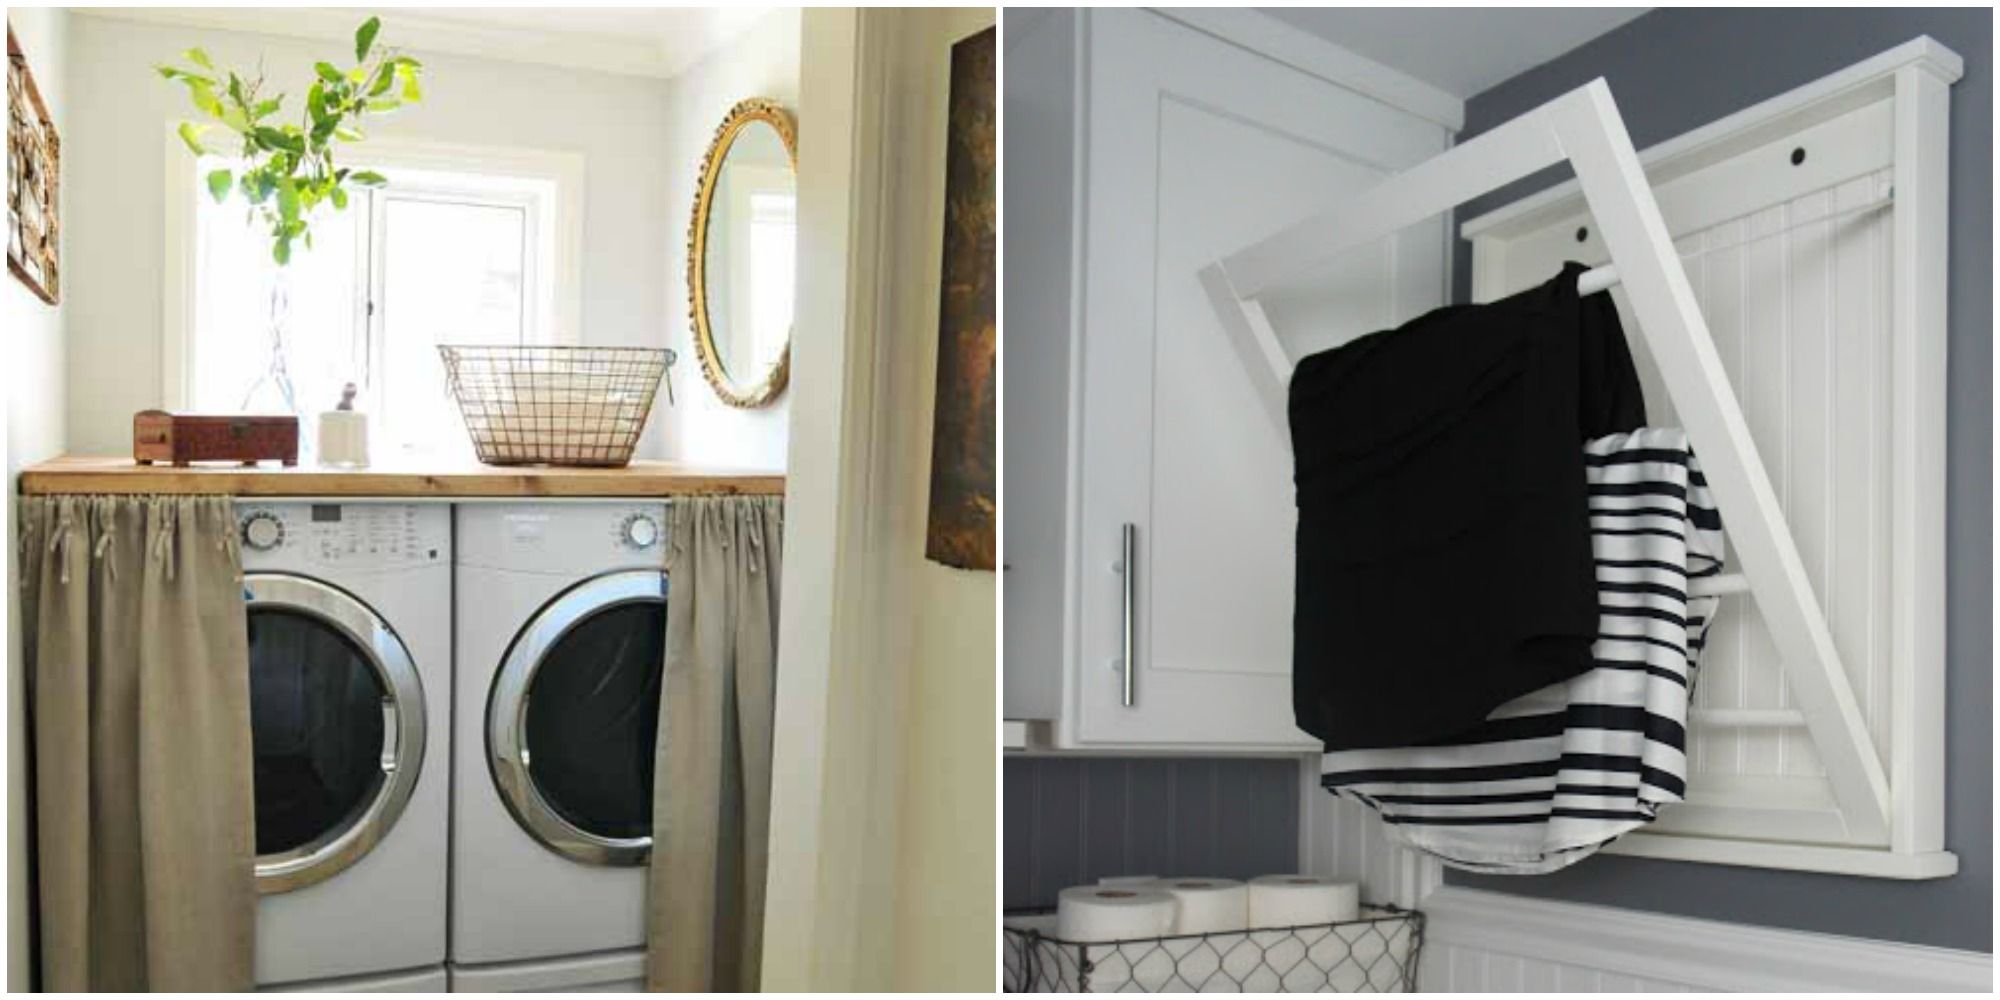 Laundry Room Tips: Making the Most of a Small Space - Prime Storage